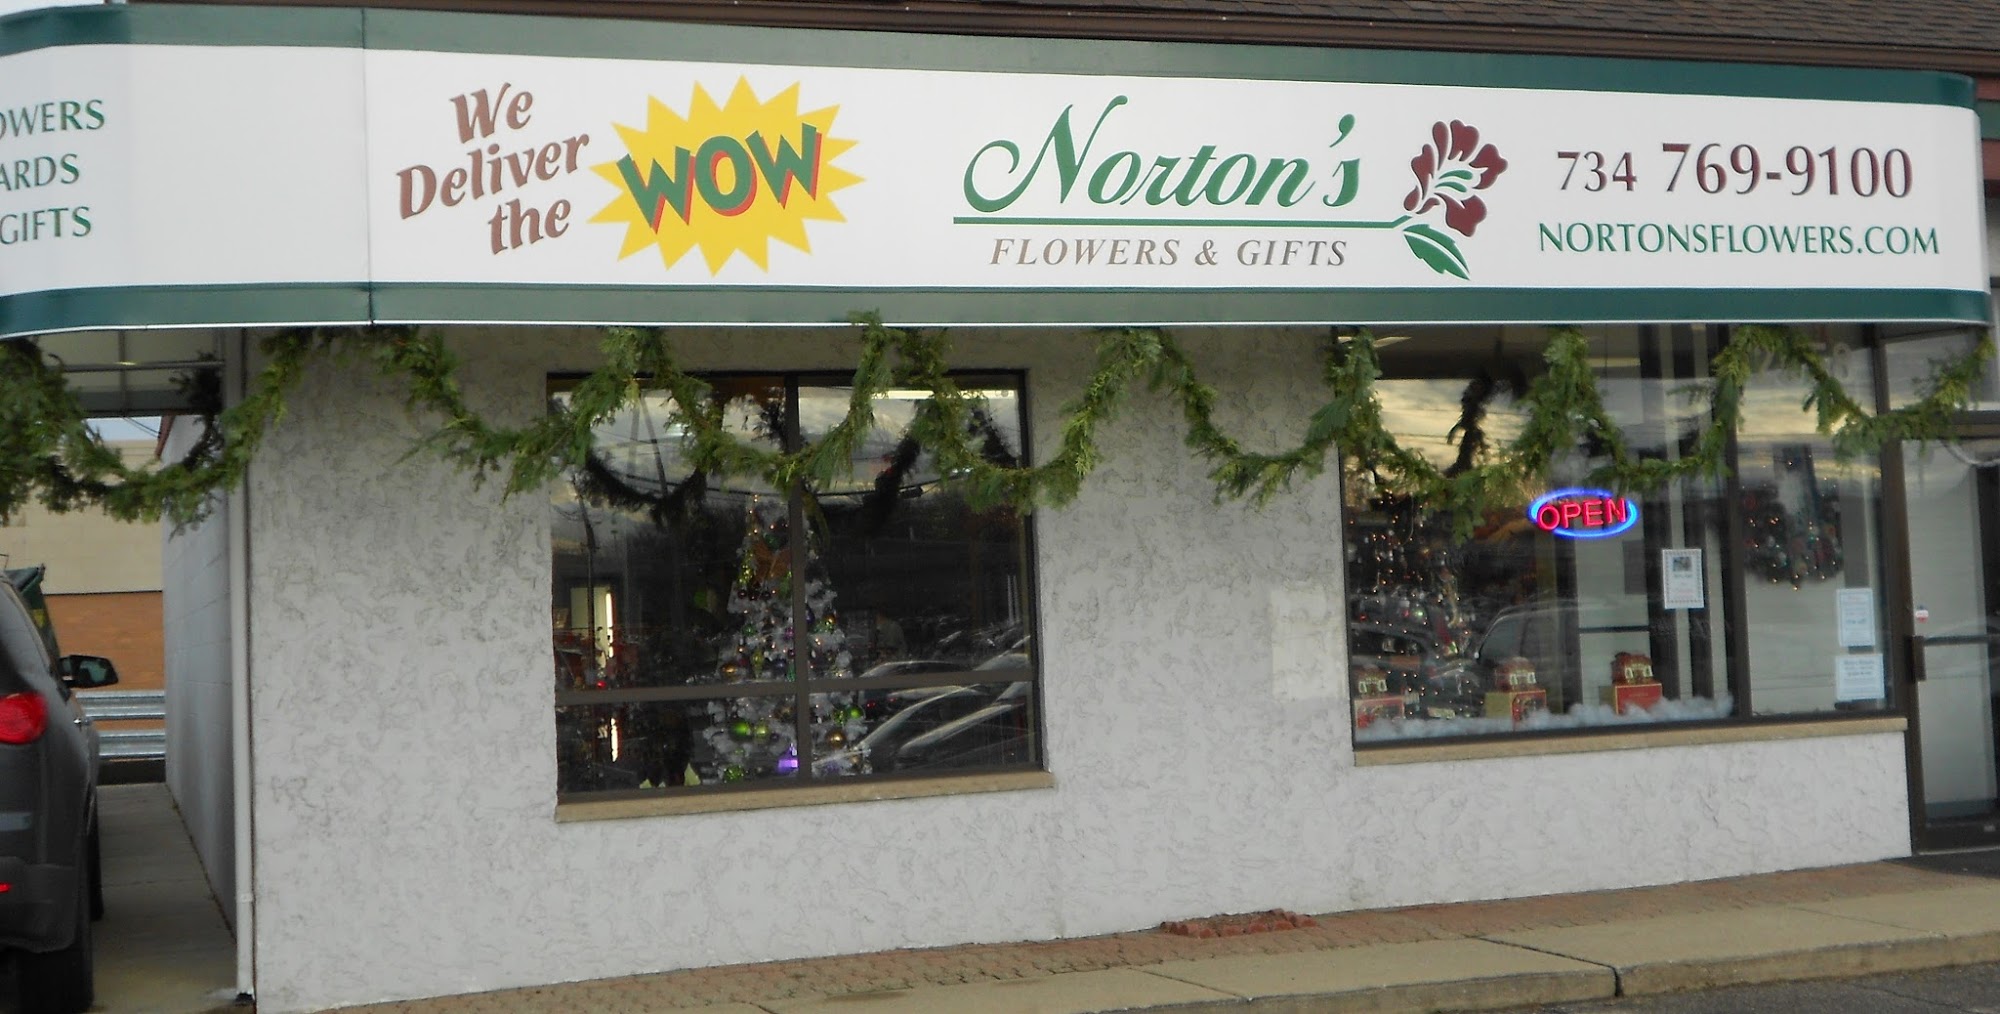 Norton's Flowers & Gifts